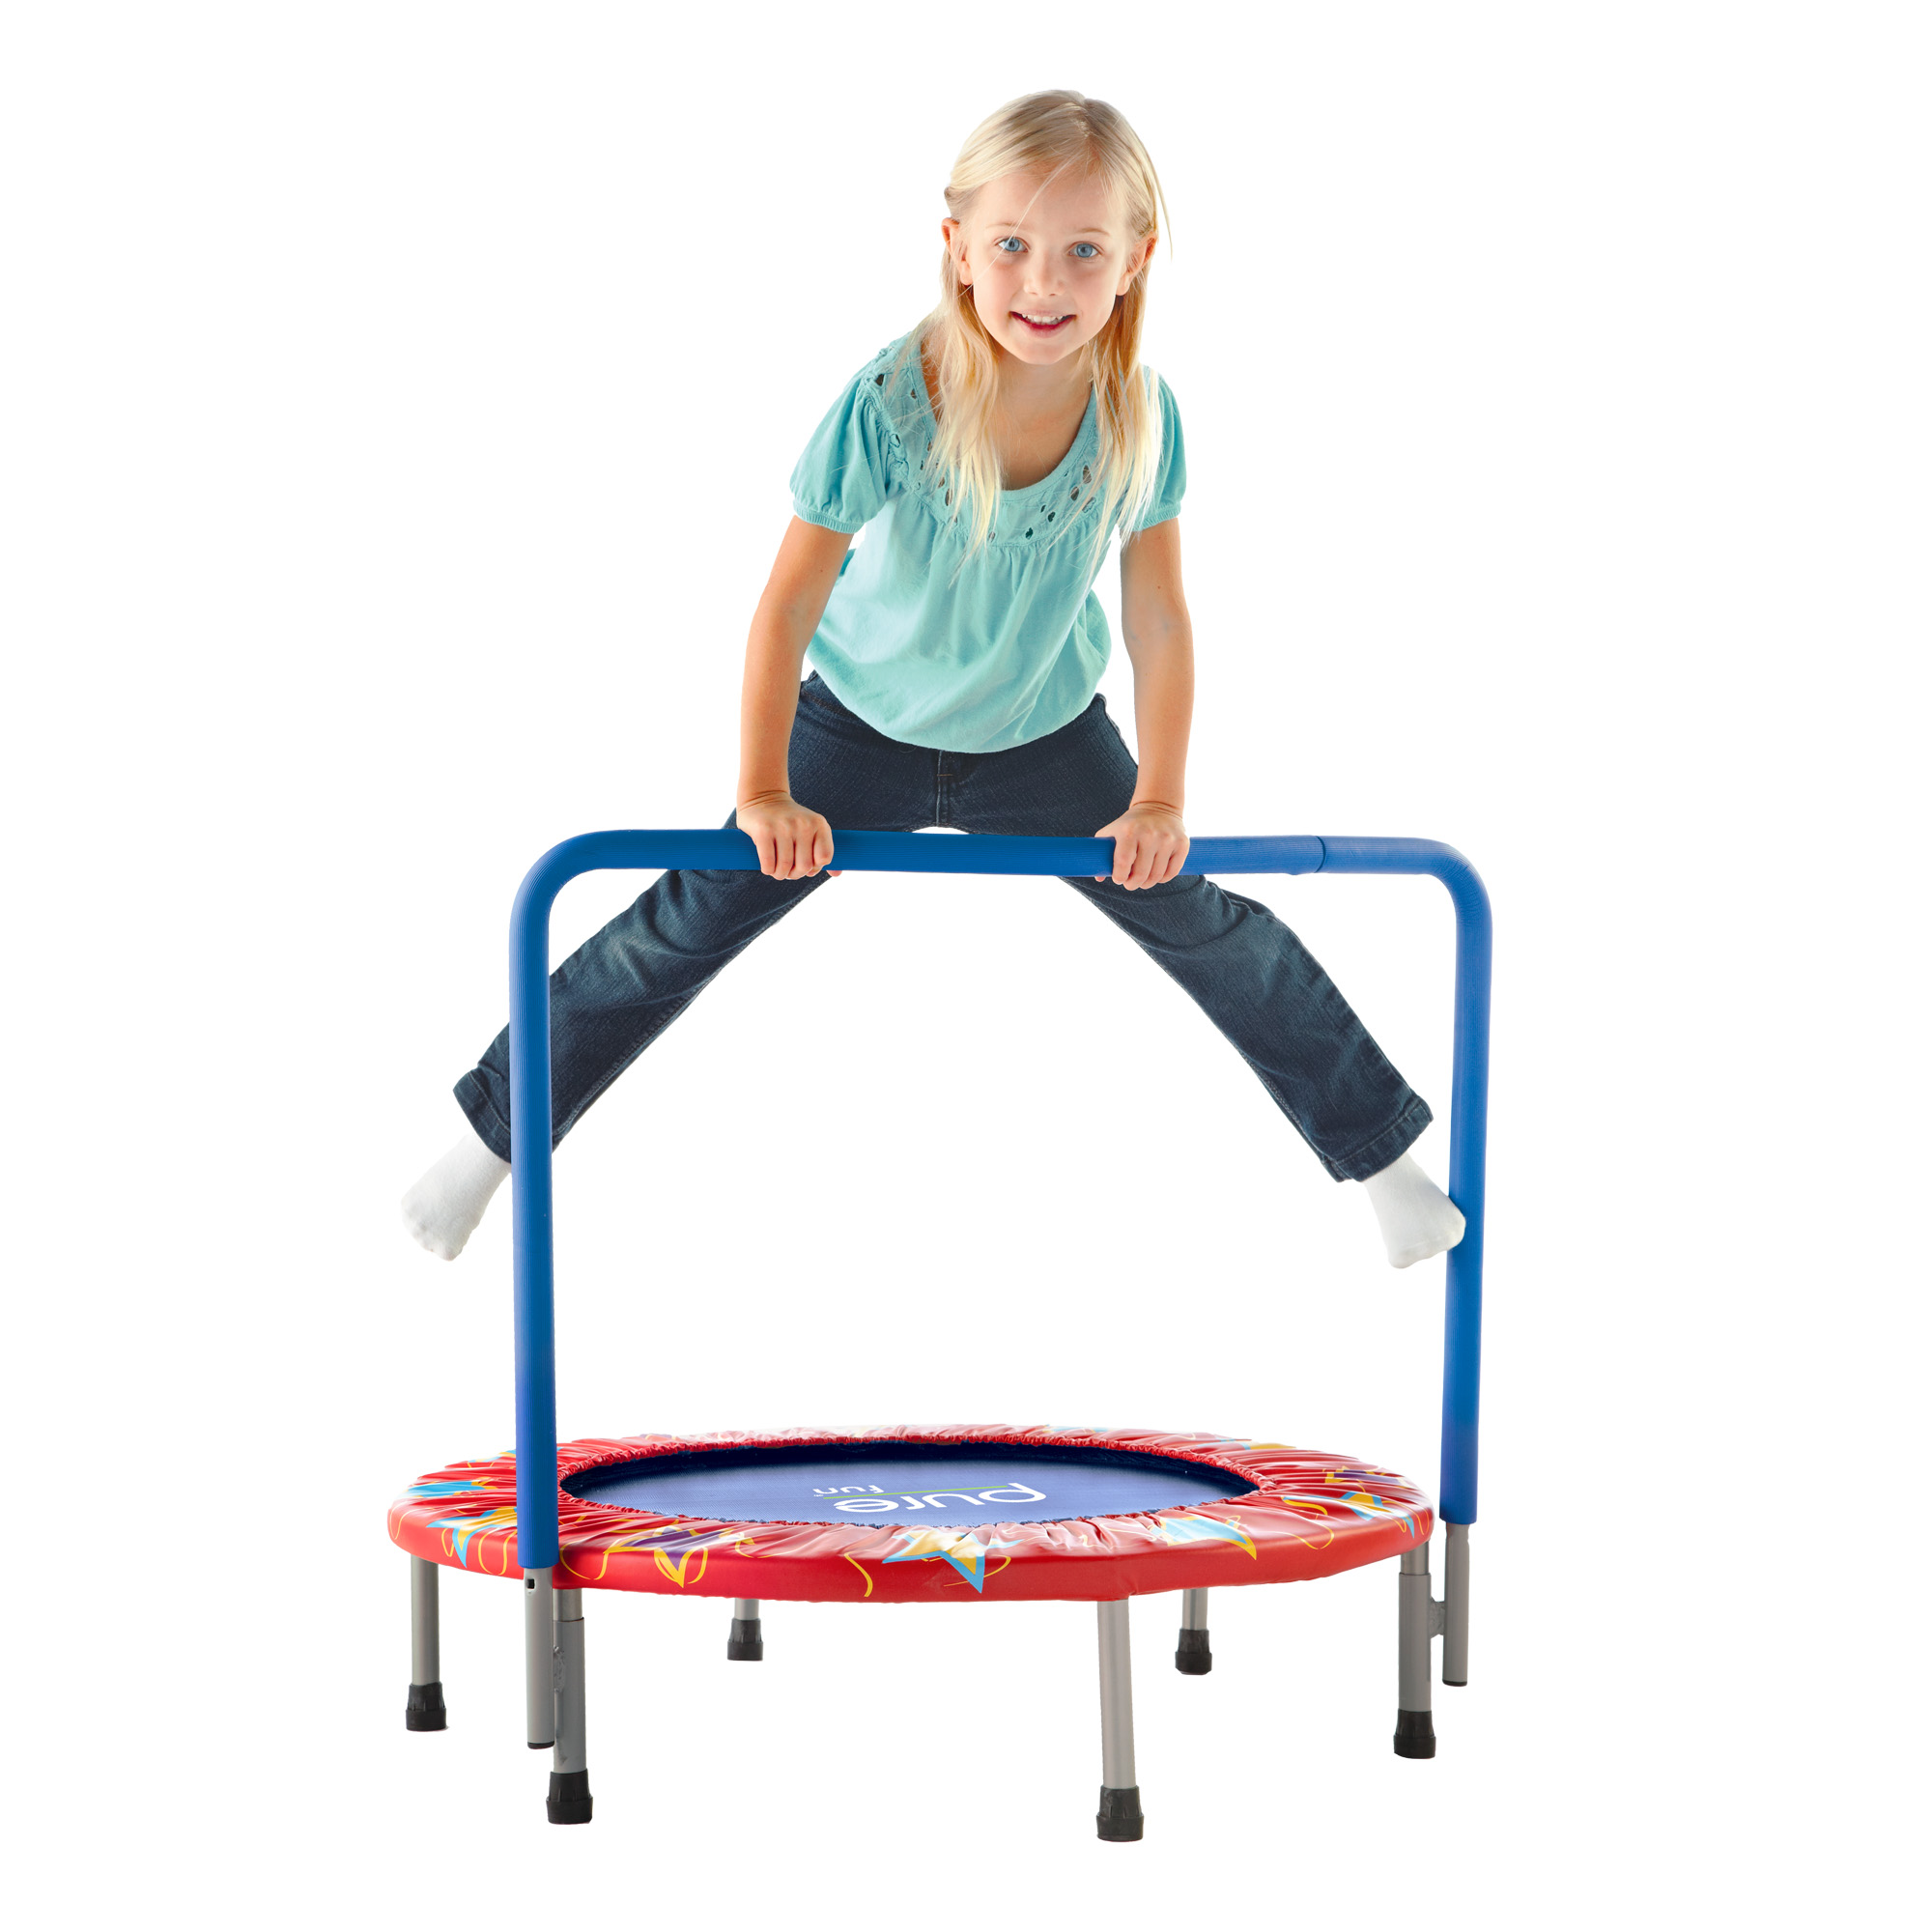 Pure Fun 36-Inch Trampoline for Kids, with Handrail, Red/Blue - image 4 of 4